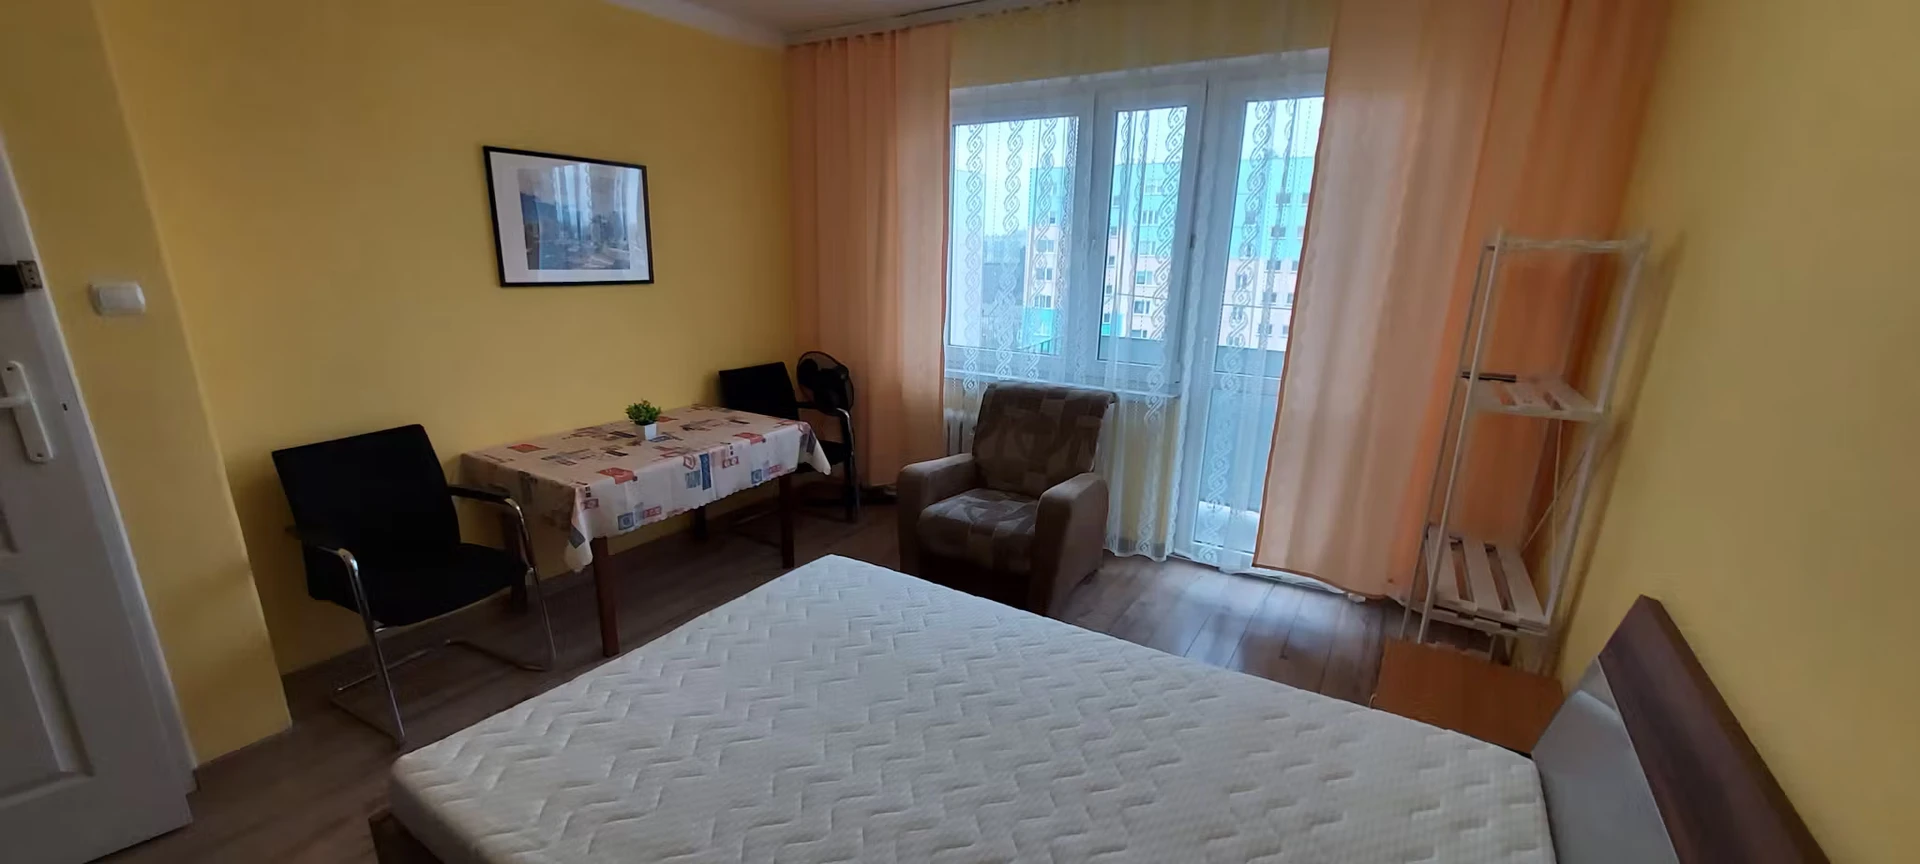 Renting rooms by the month in Rzeszów